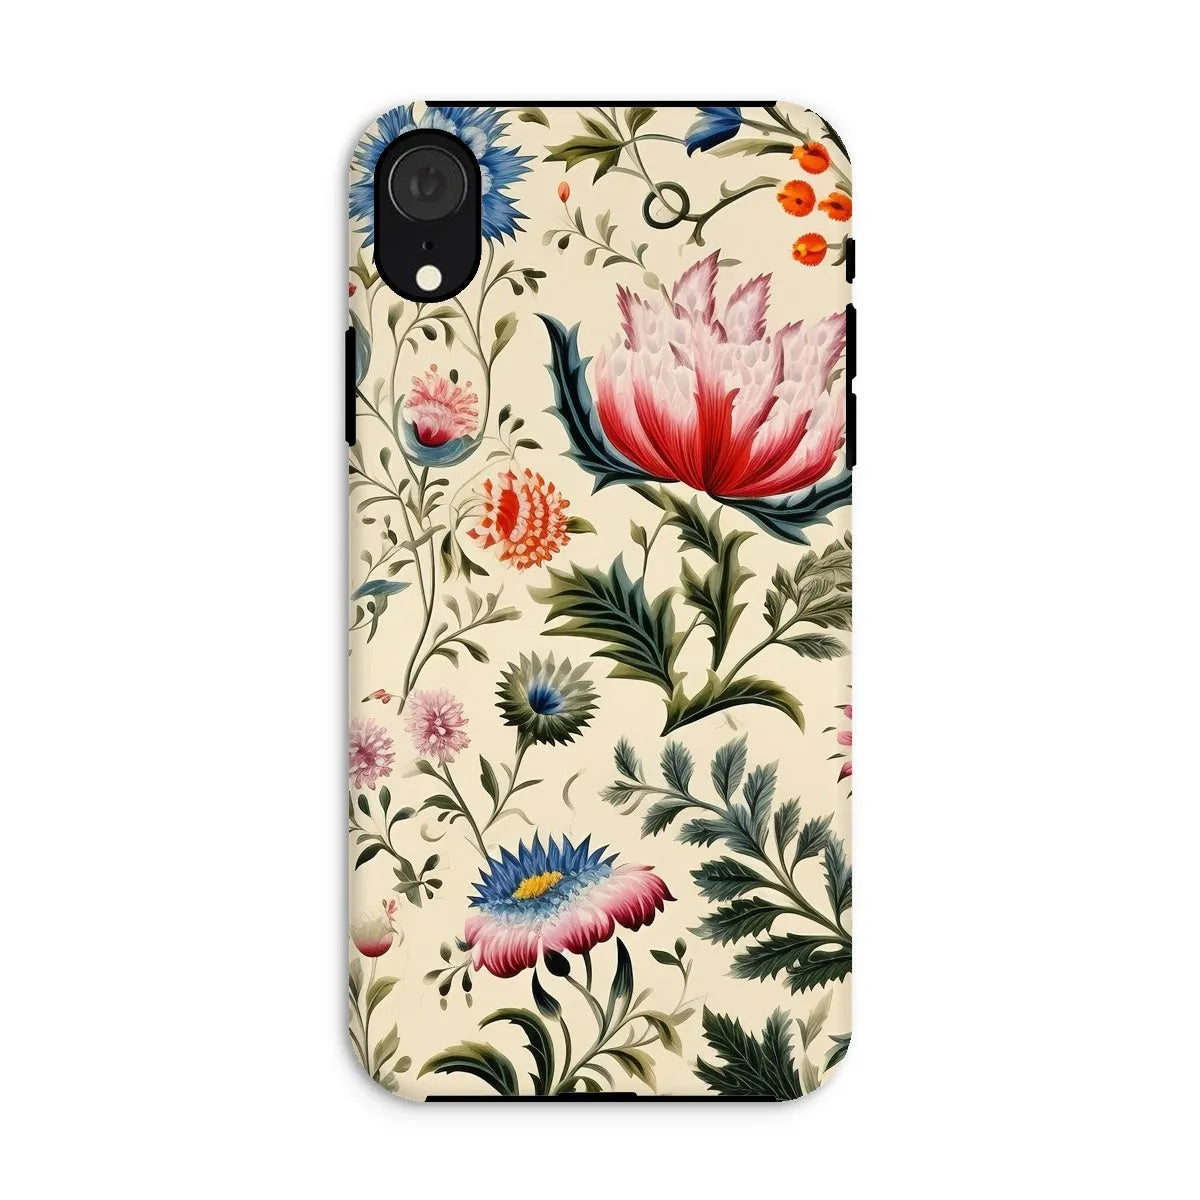 Wildflower Hoopla - Floral Garden Aesthetic Phone Case - Iphone Xr / Matte - Mobile Phone Cases - Aesthetic Art